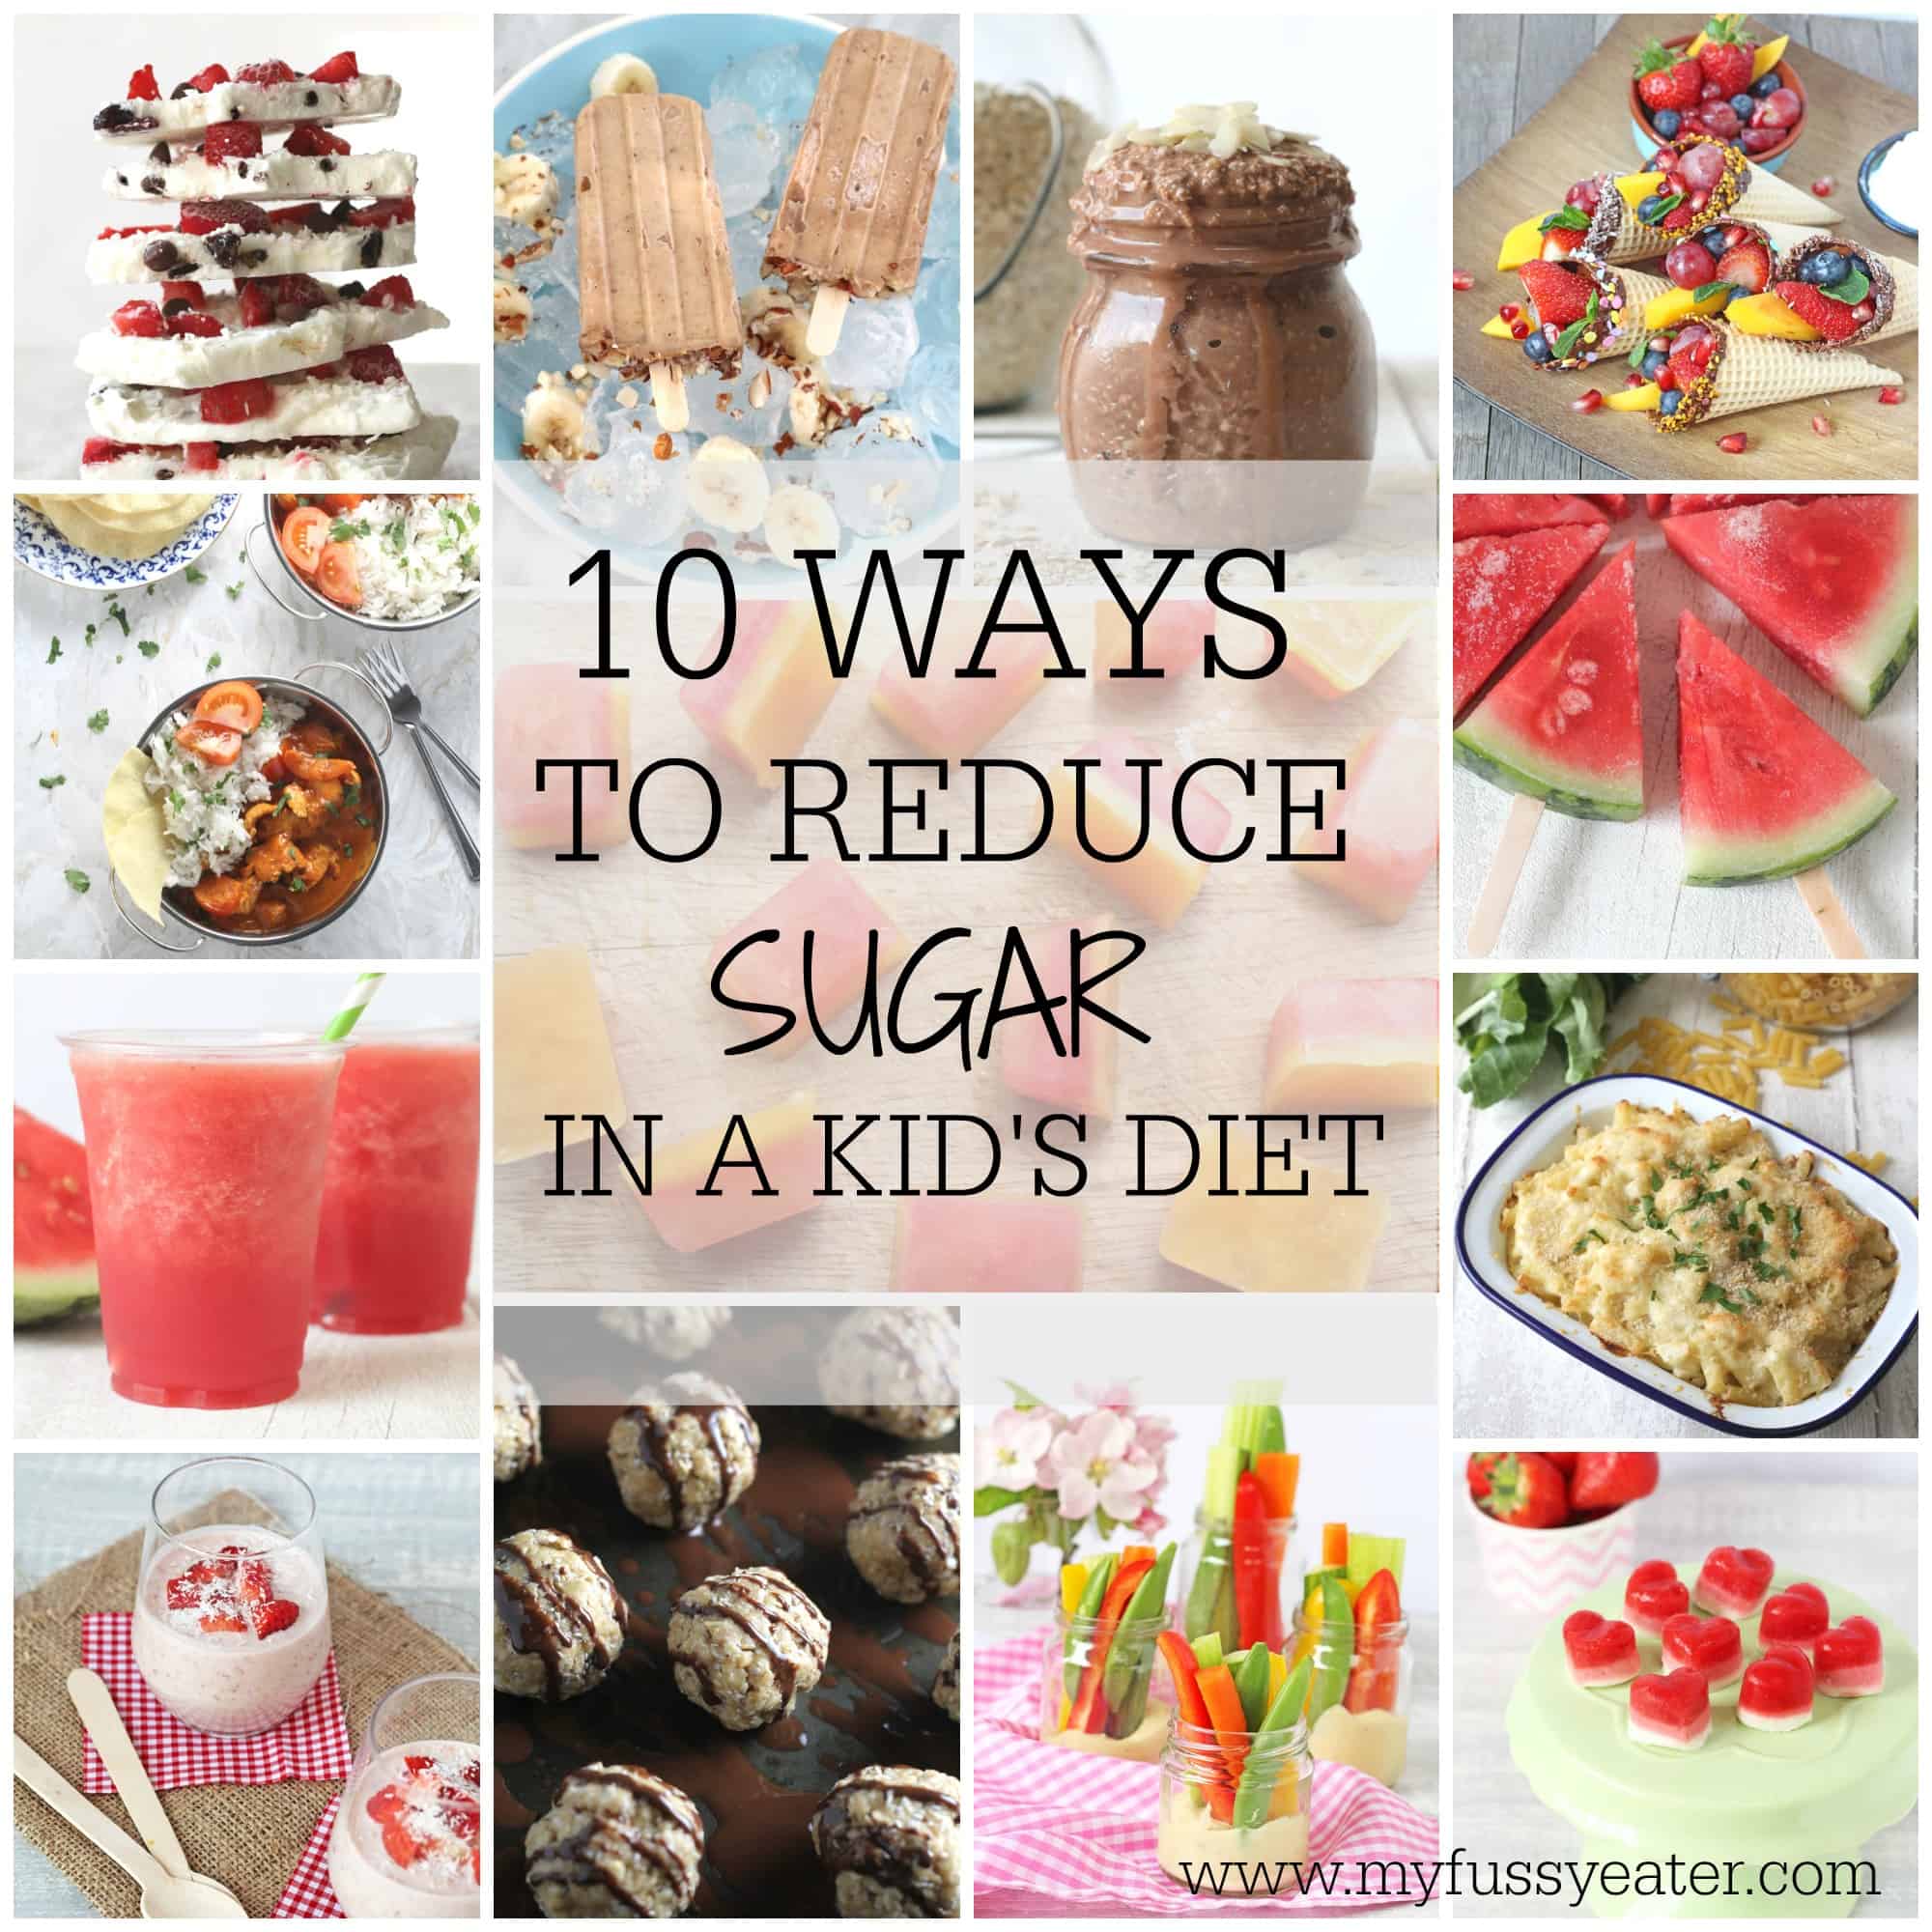 10 Easy Ways To Reduce Sugar In Your Kids